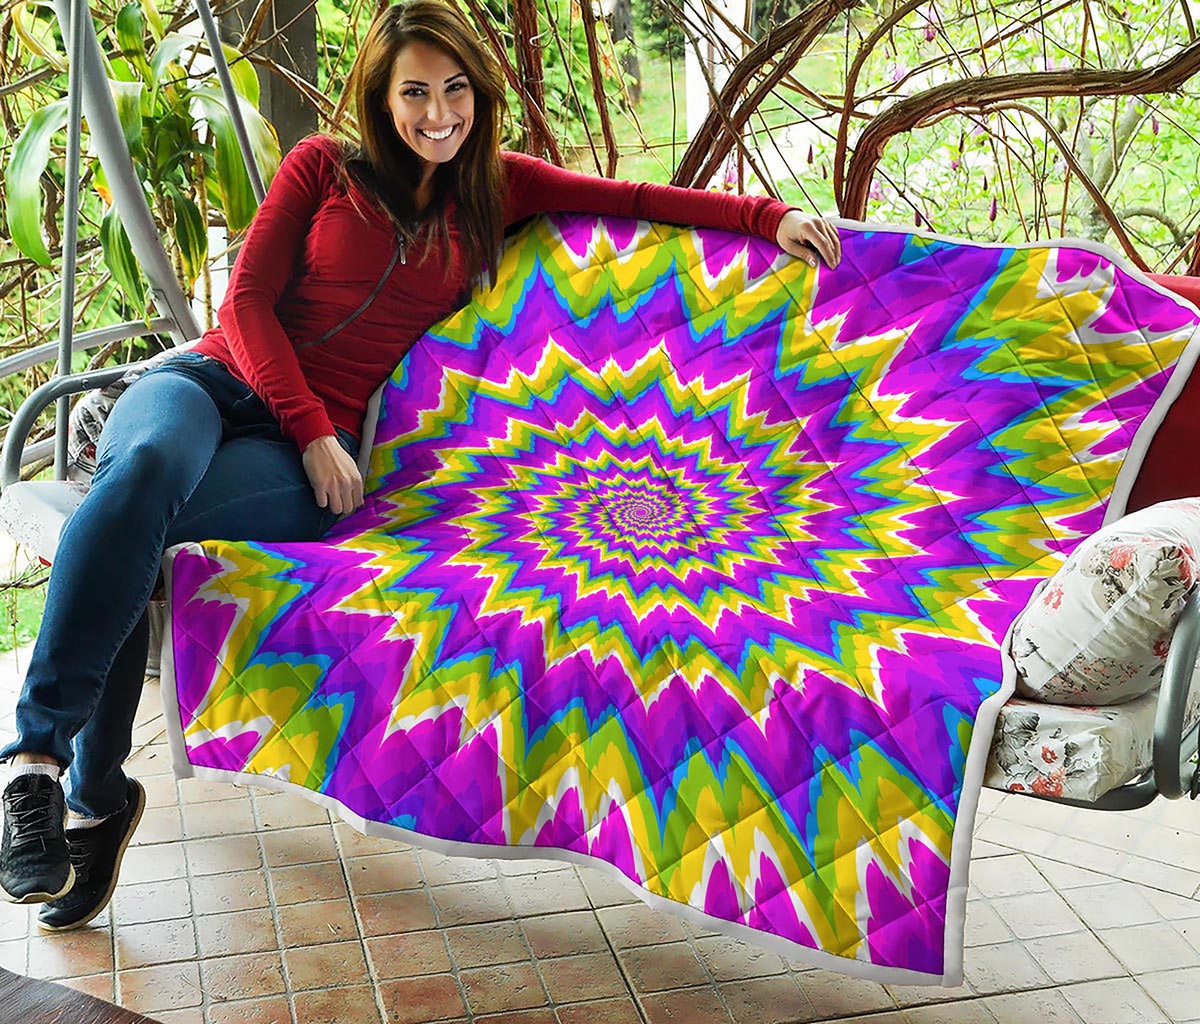 Abstract Spiral Moving Optical Illusion Quilt